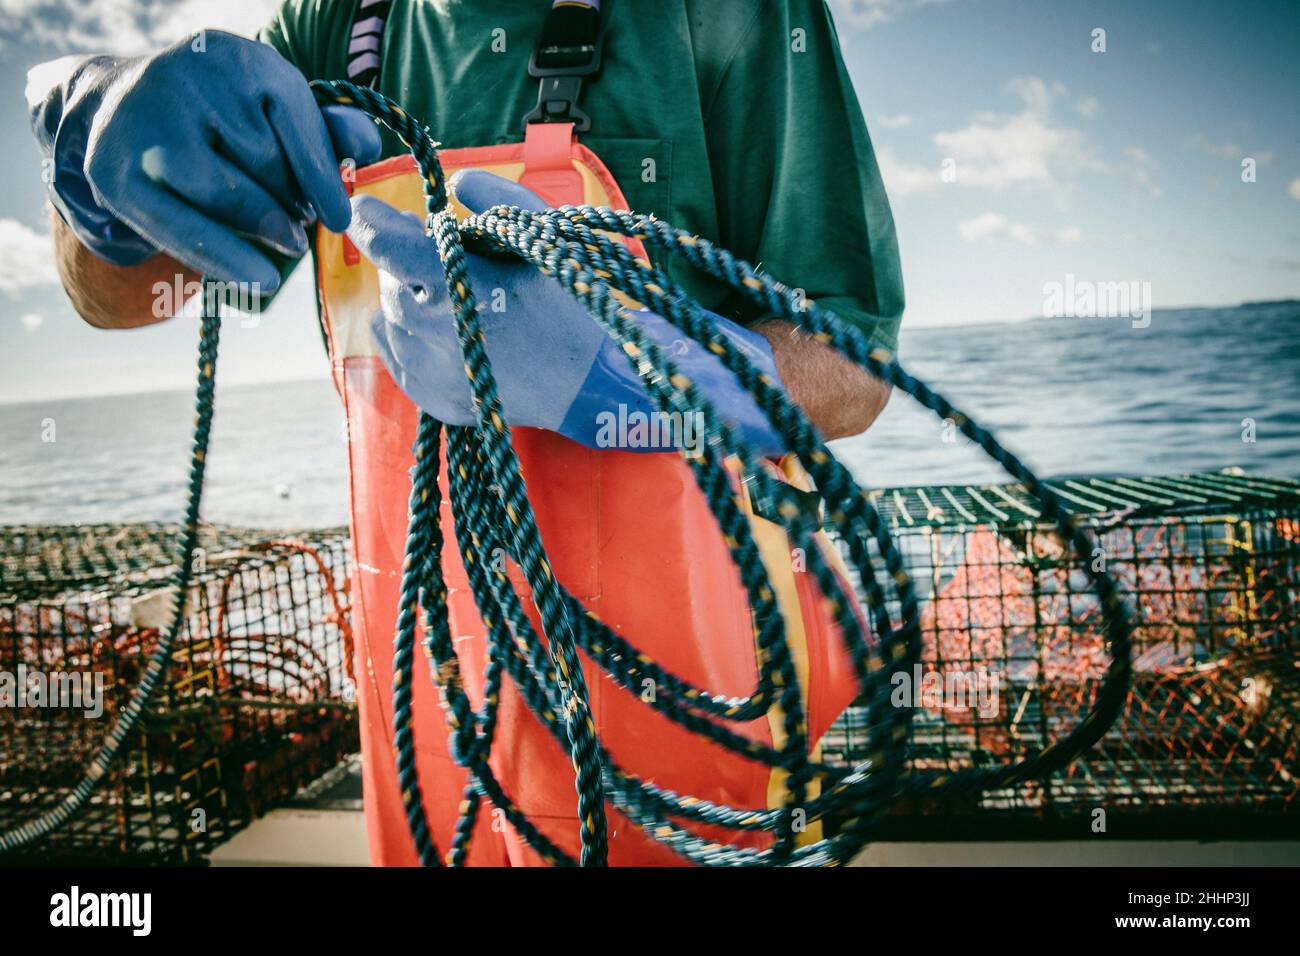 Lobster fisherman carrying rope on the fishing boat Stock Photo